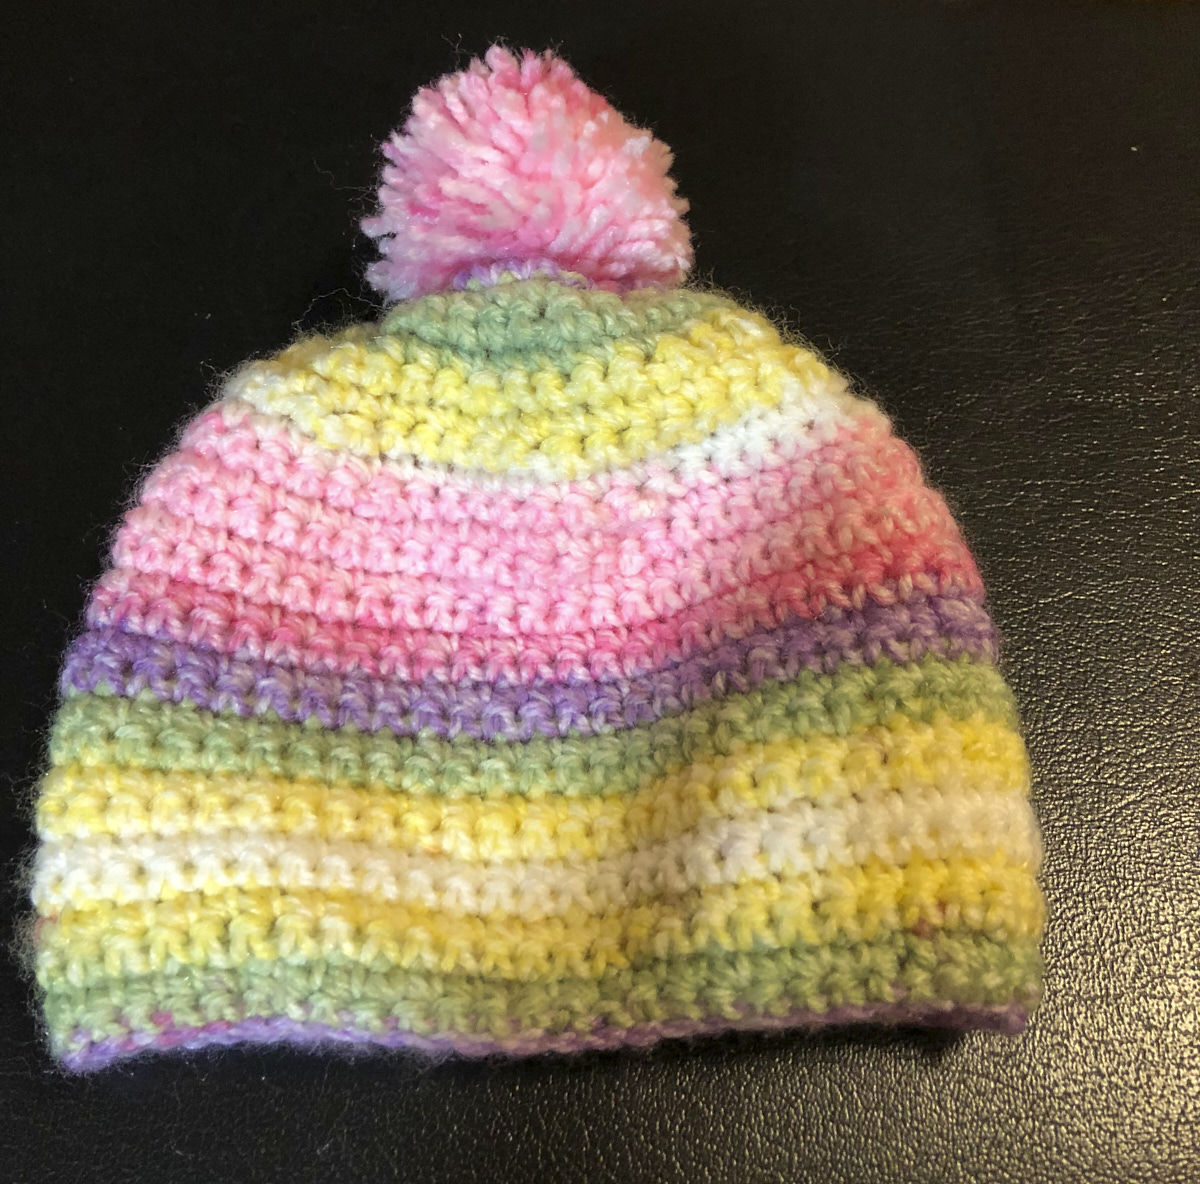 crocheted hat by Kay